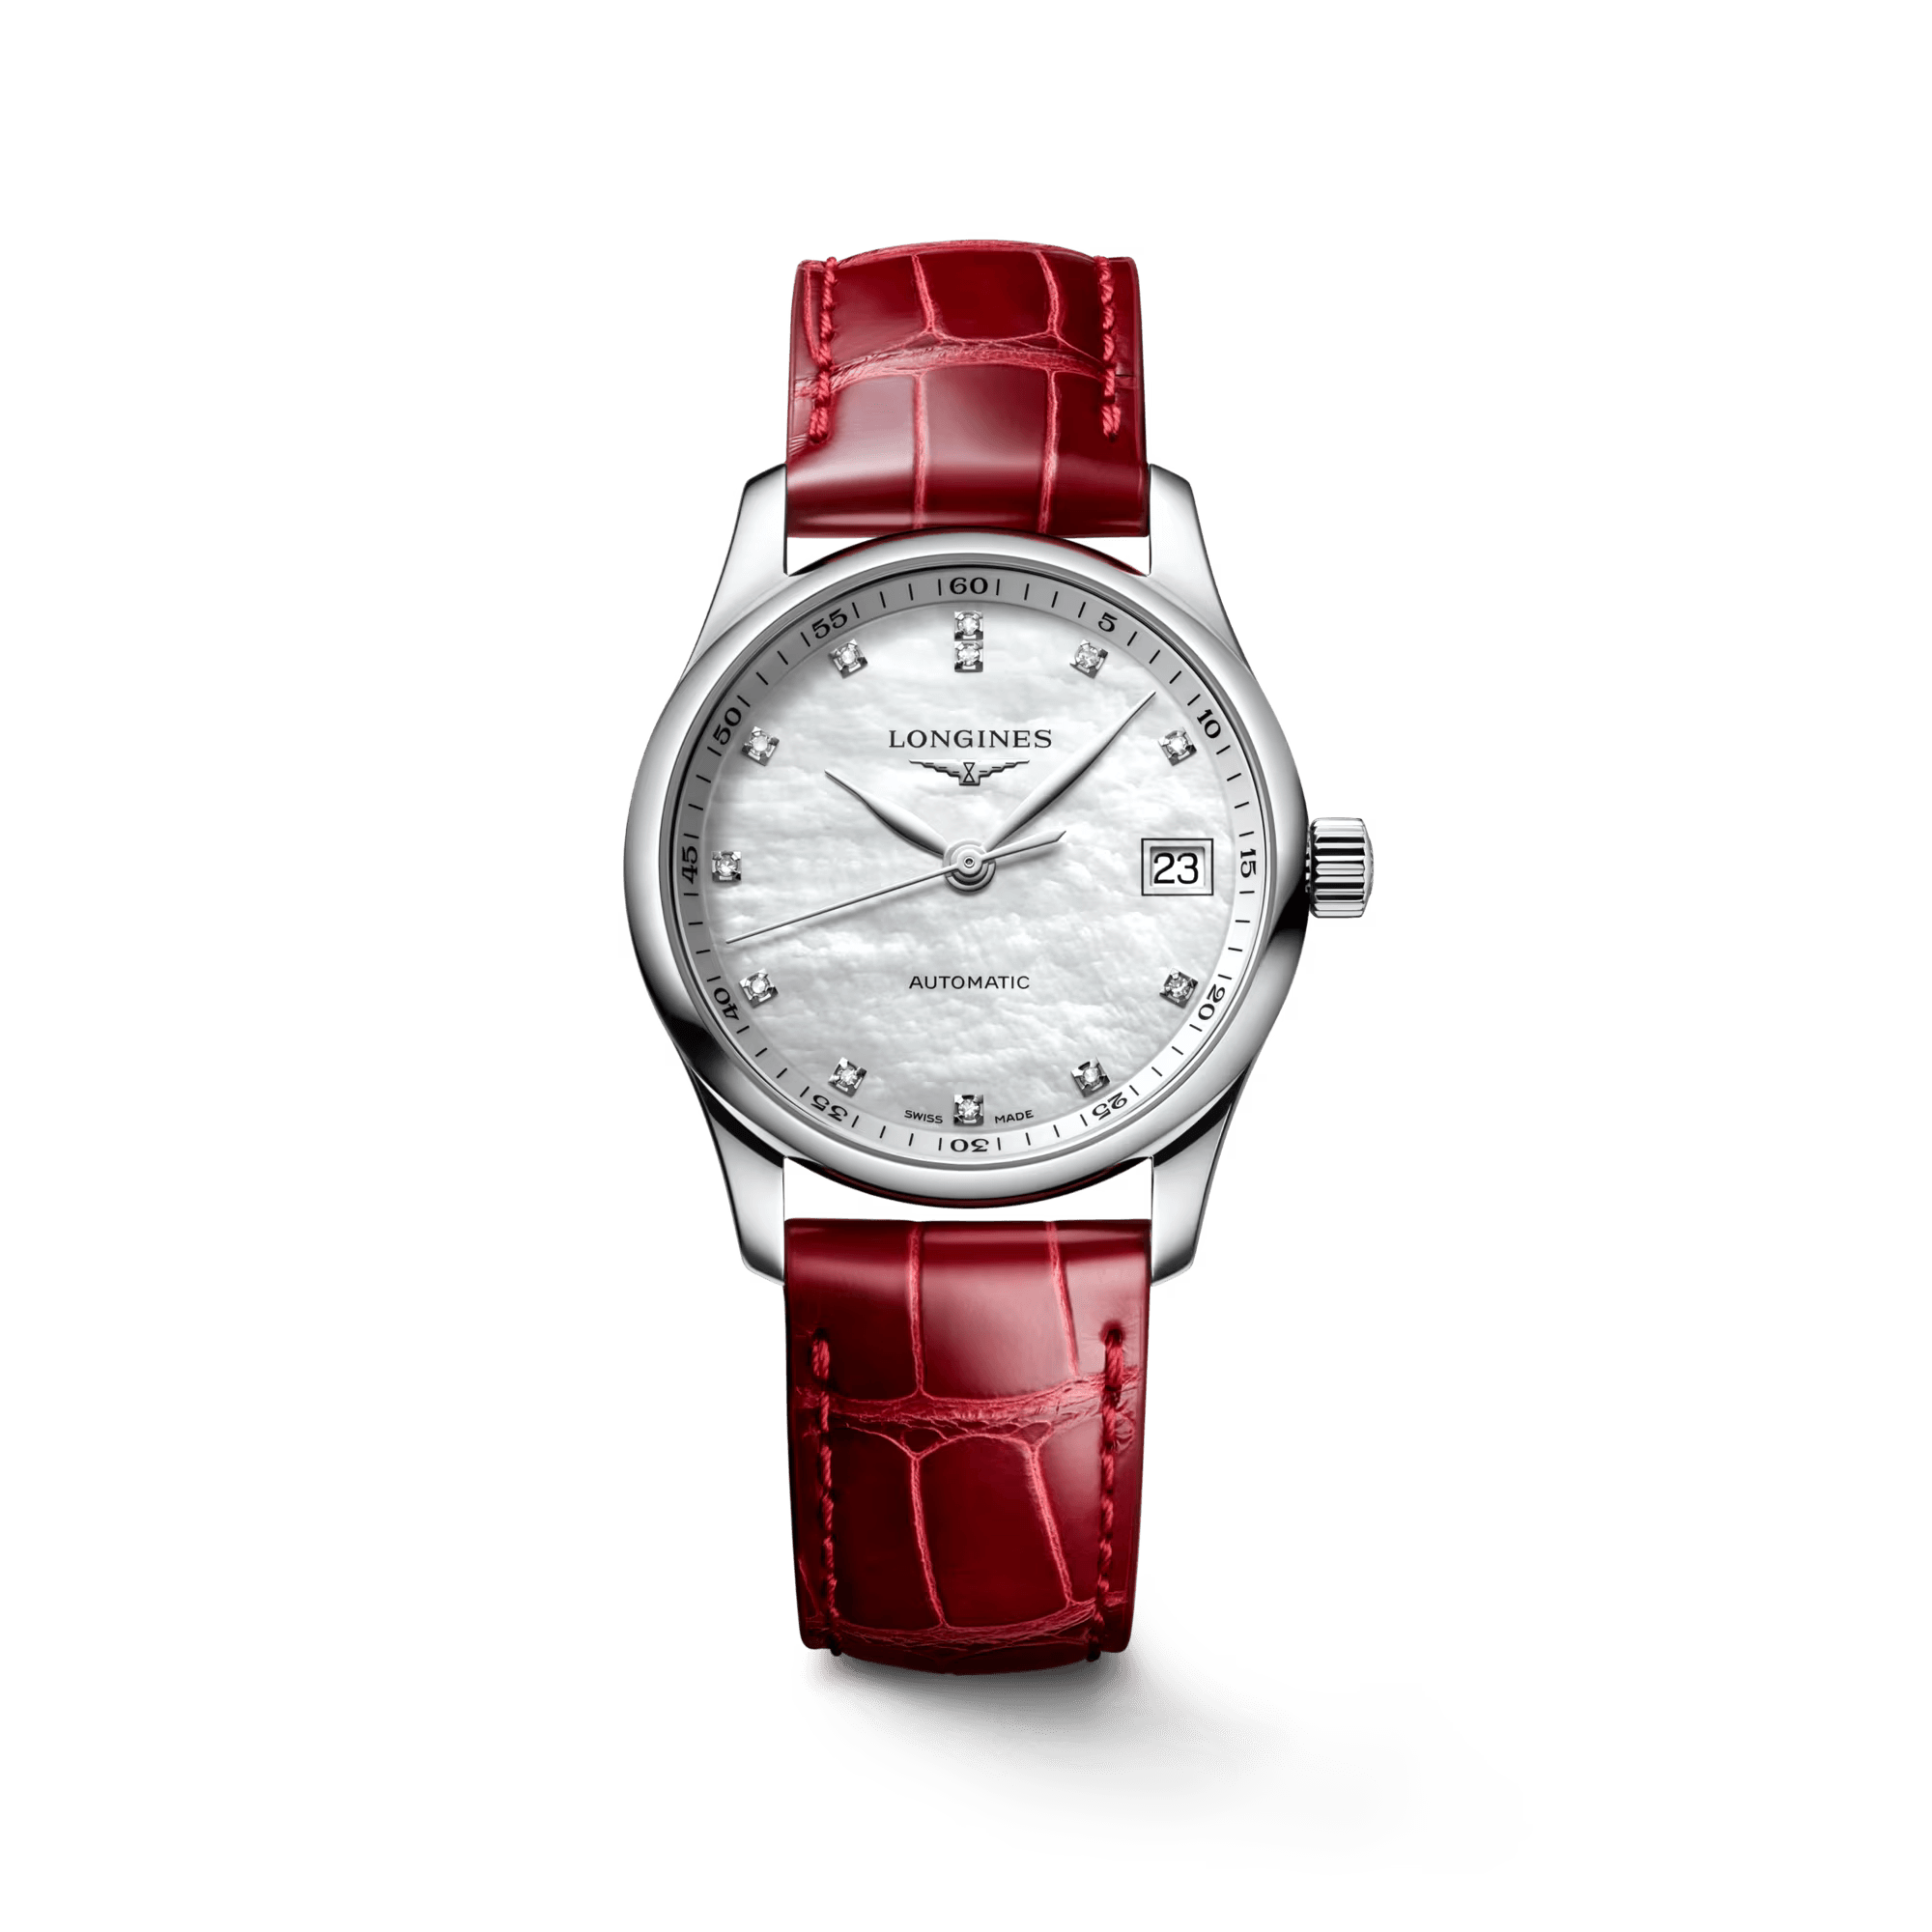 The Longines Master Collection Automatic Women's Watch L23574872